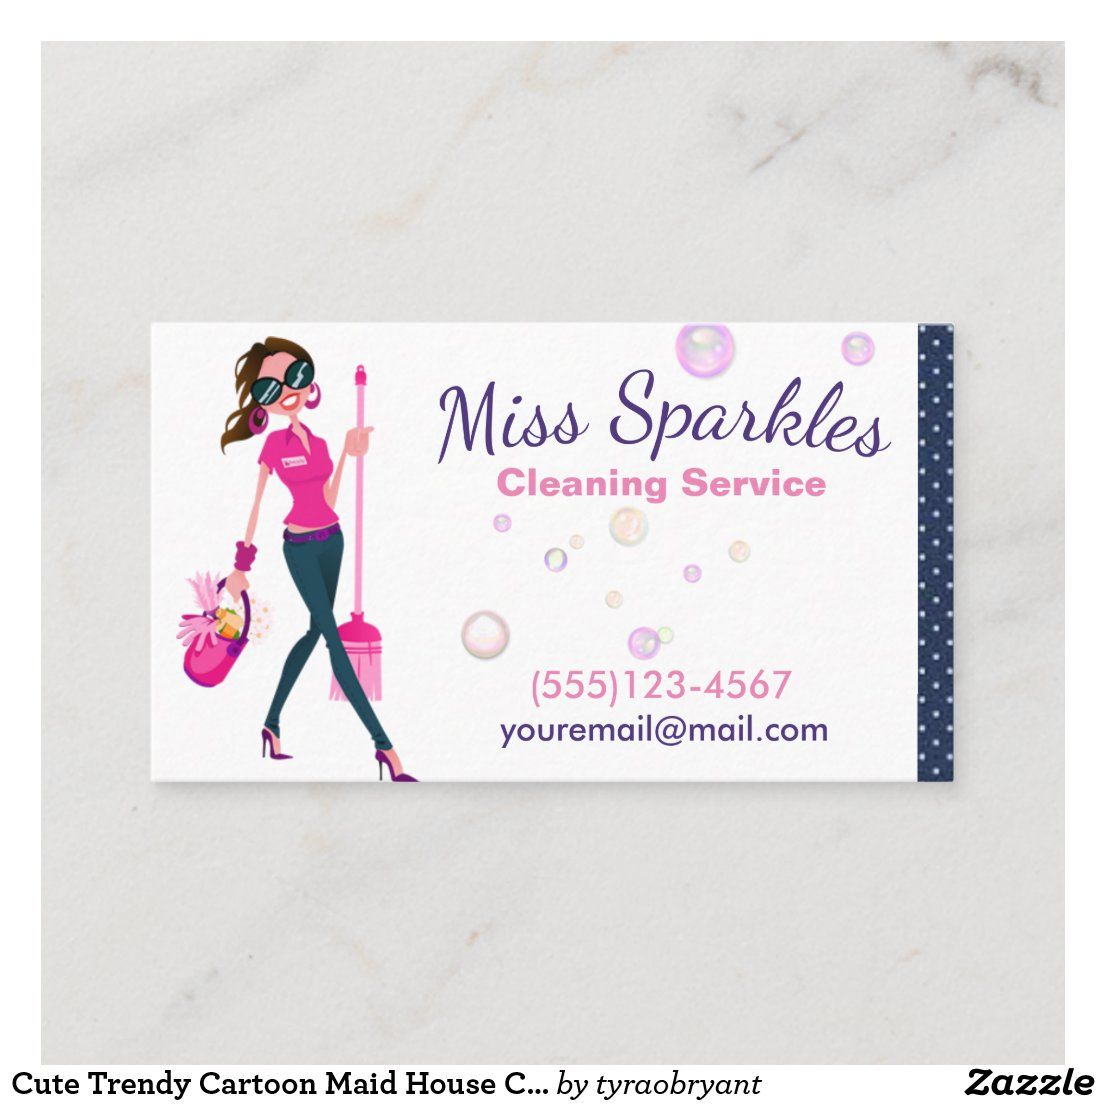 maid service business cards 1